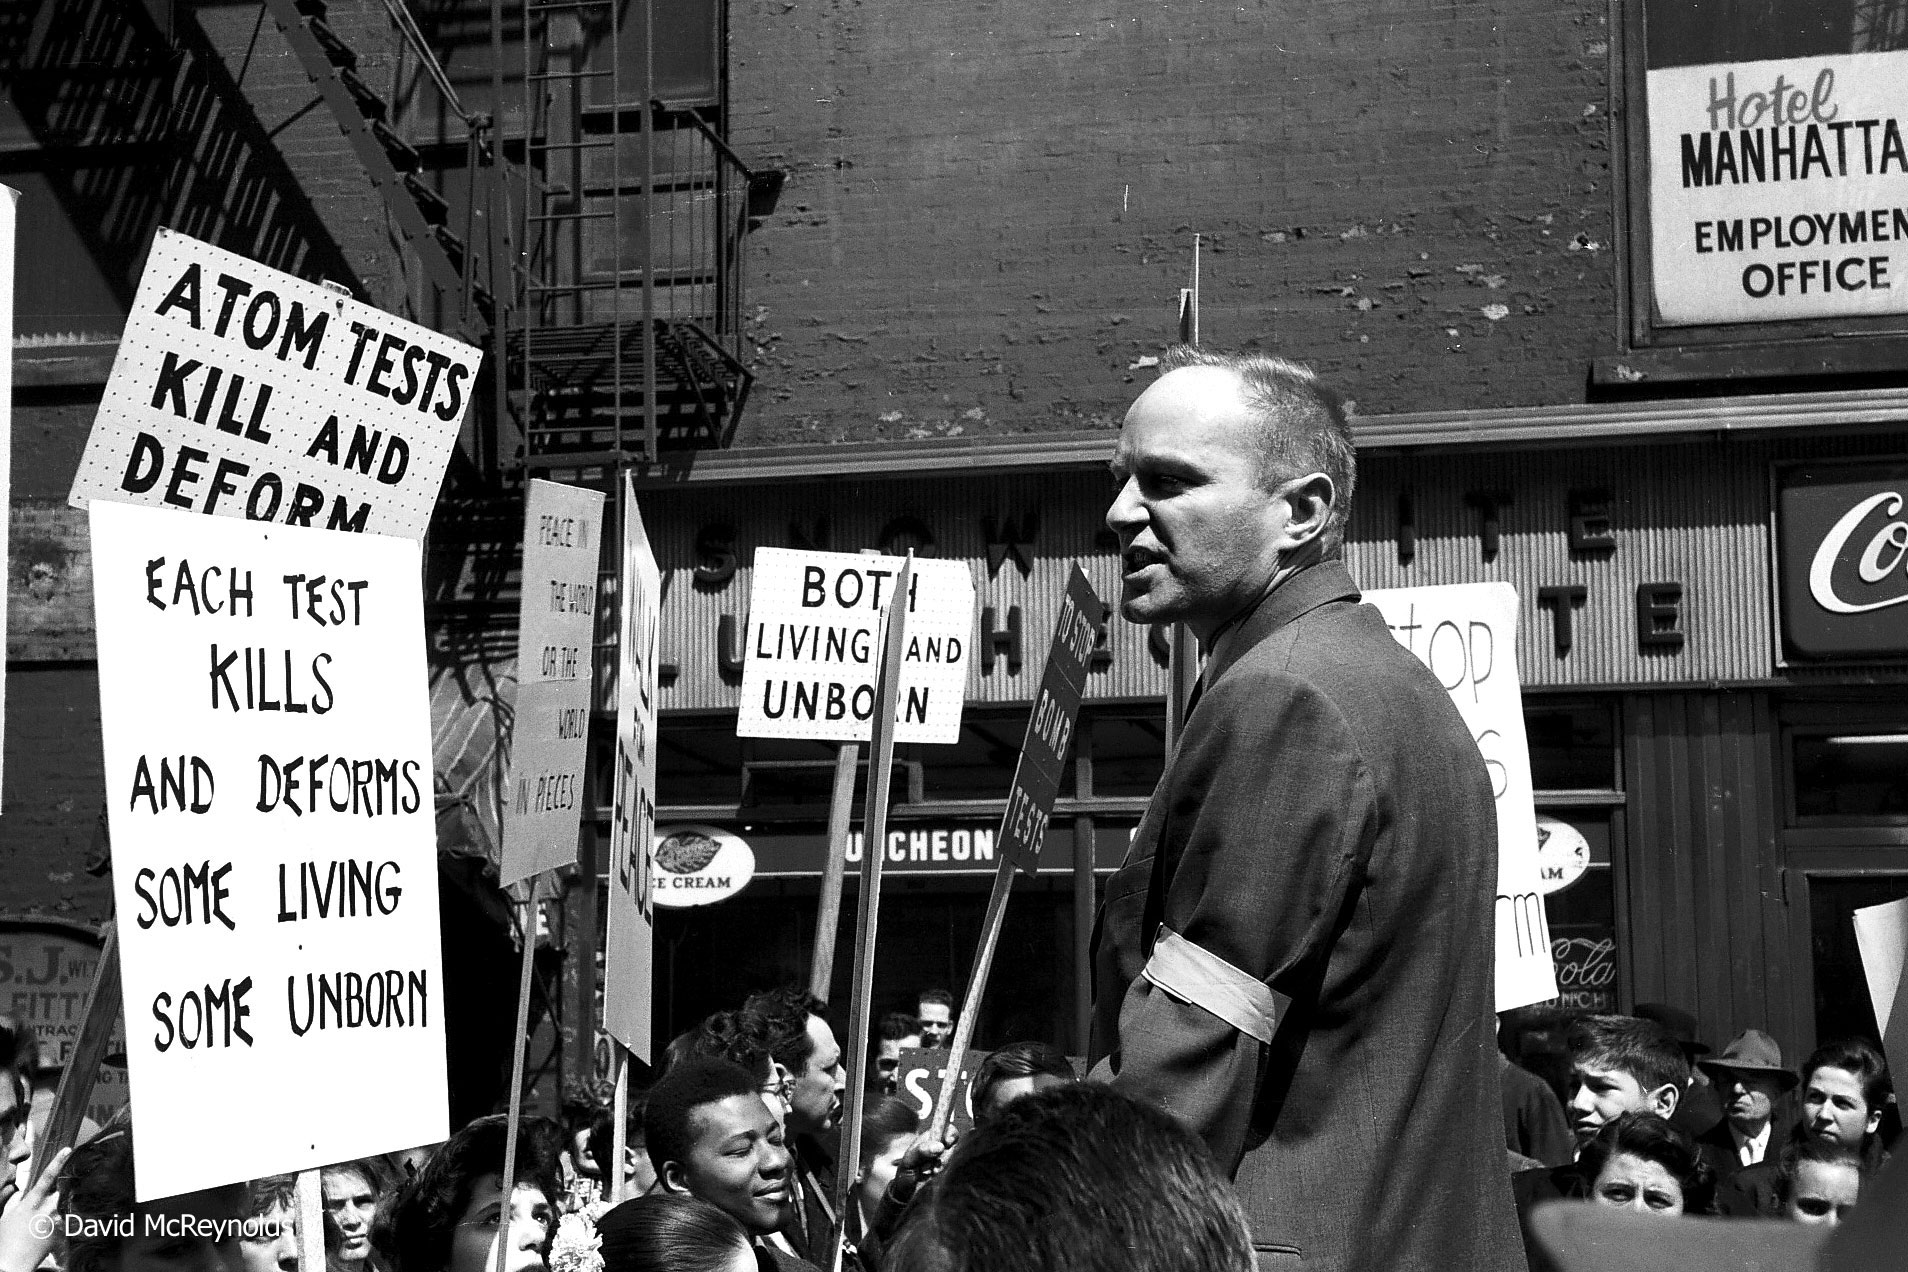  DAVID DELLINGER speaks at a rally during the Walk for Peace. New York City, April 4, 1958. 